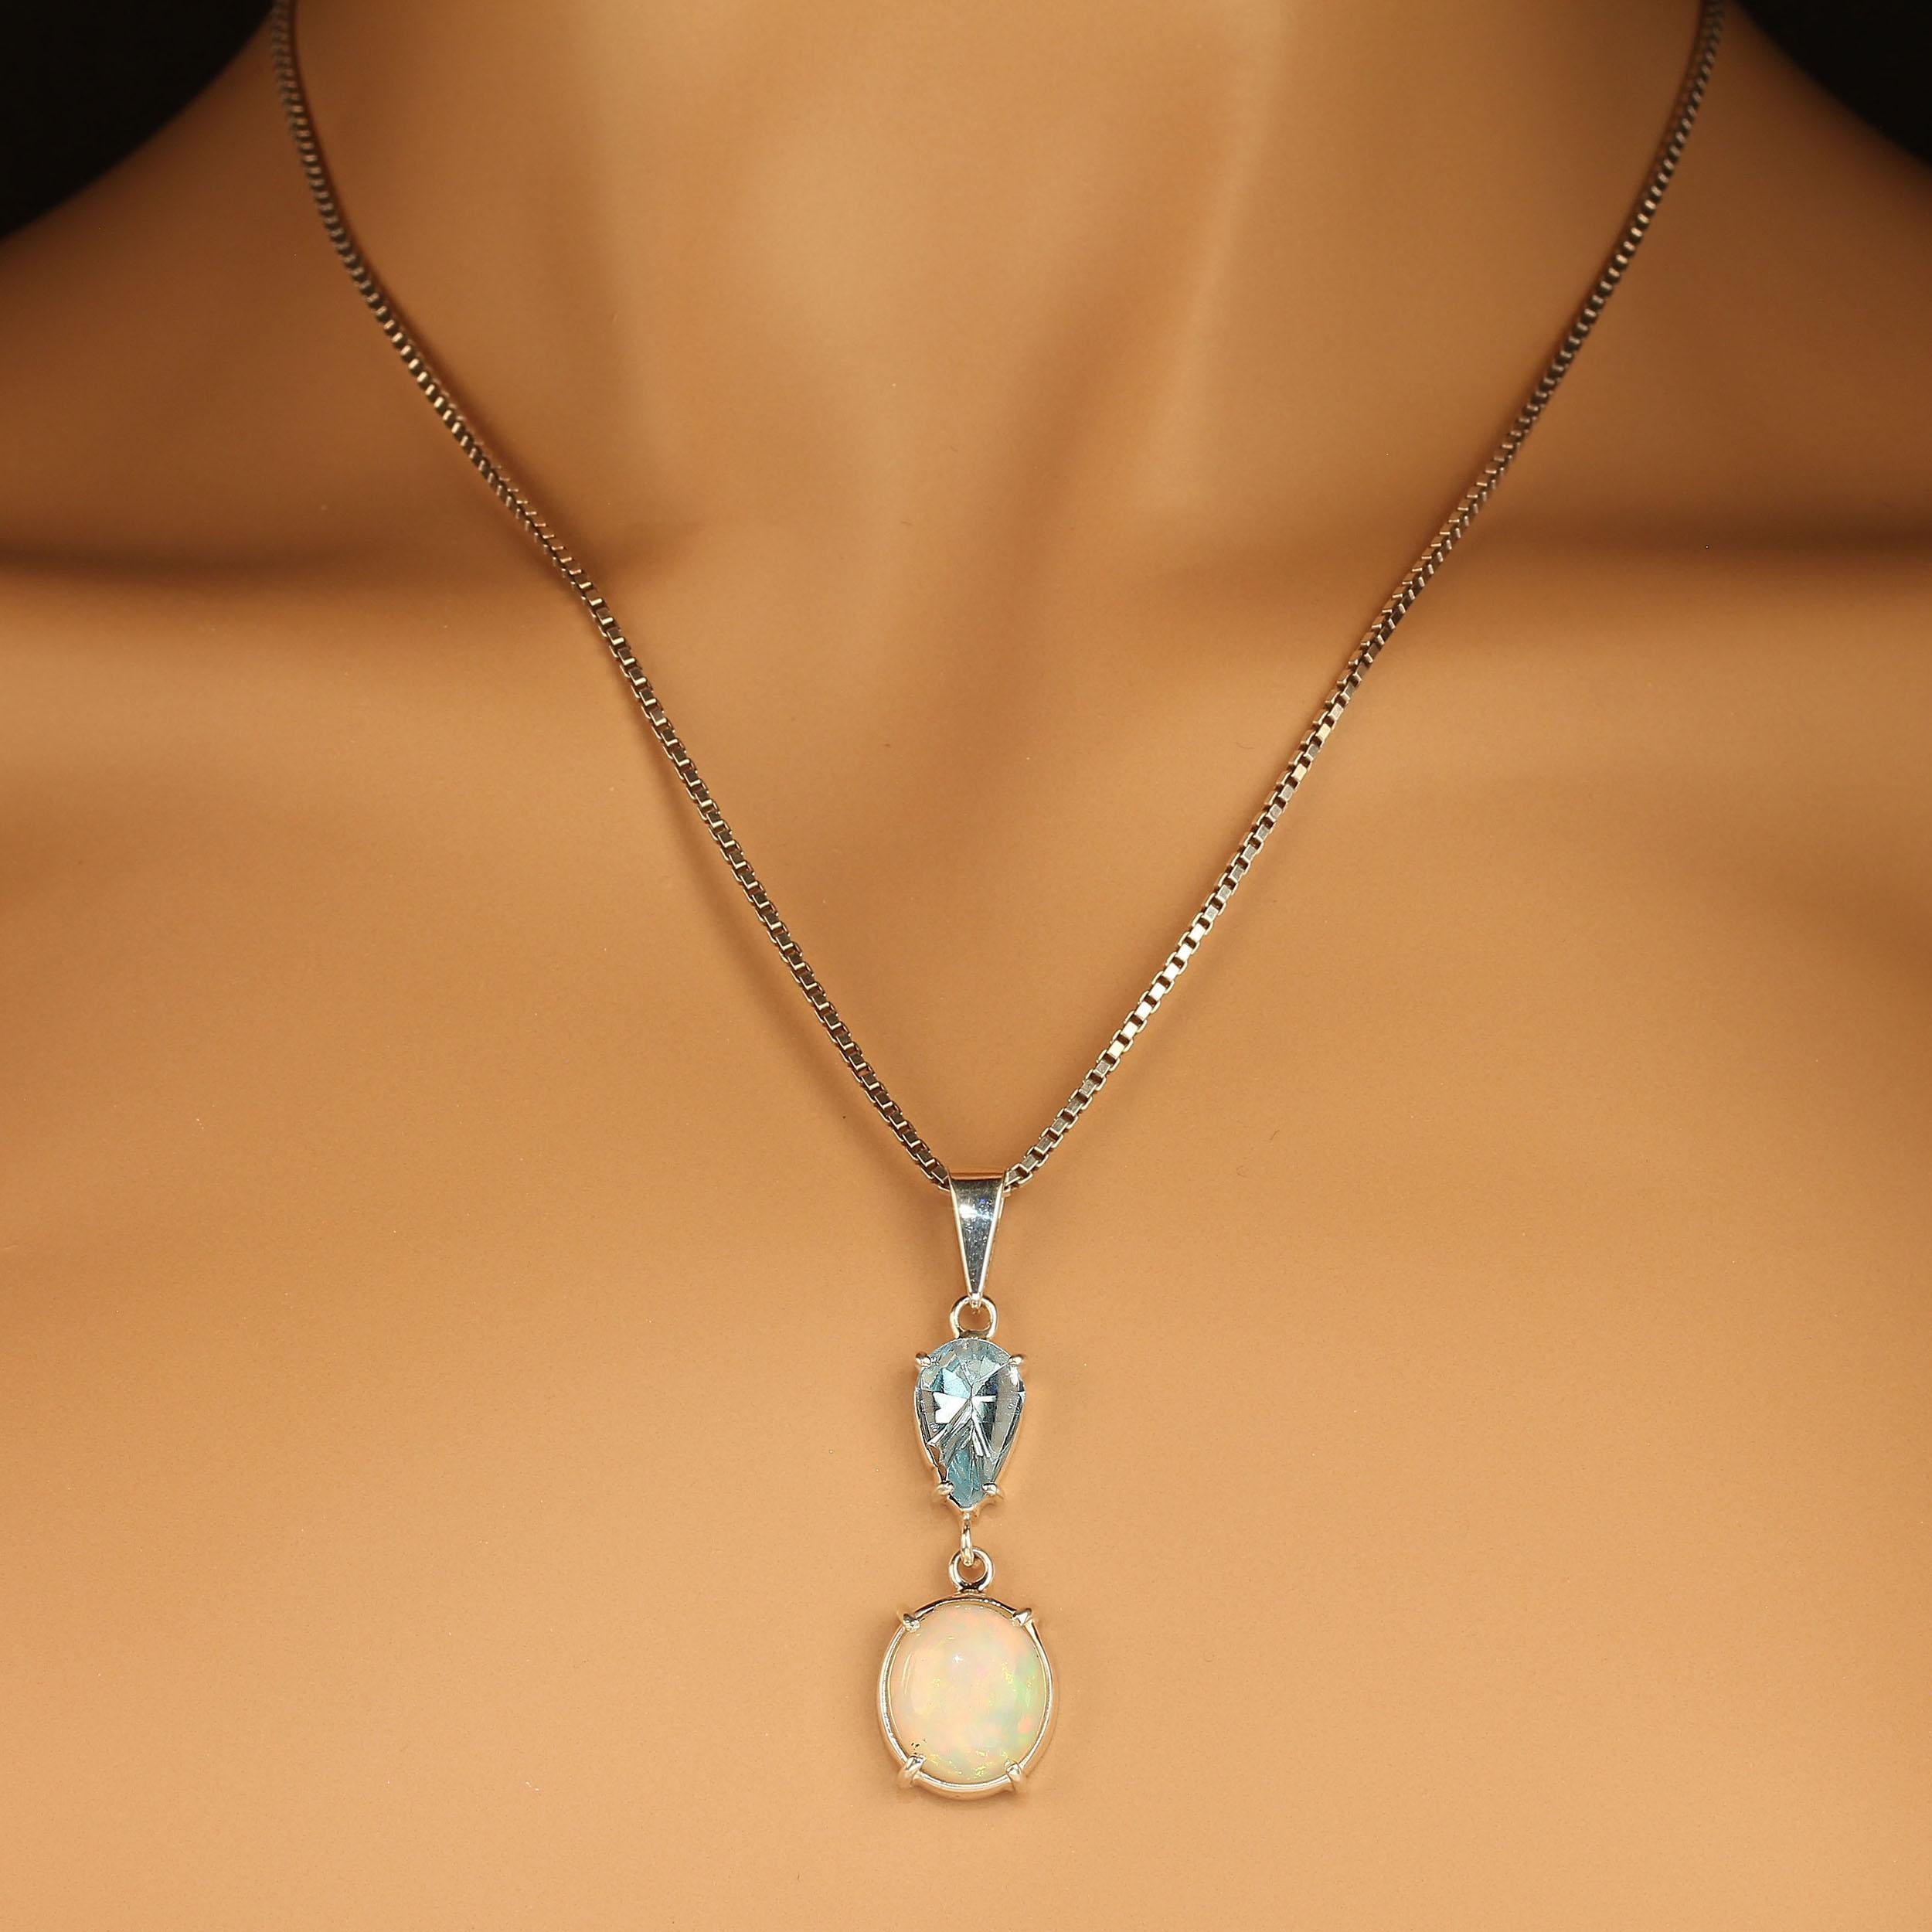 Elegant and unique, this Opal and Blue Topaz pendant is a true beauty.  The 2.35 carat pear shape Blue Topaz lazar cut.  The 3.75 carat roval Opal features terrific flashes of red and green. The pendant is handmade in sterling silver. 
The name Opal